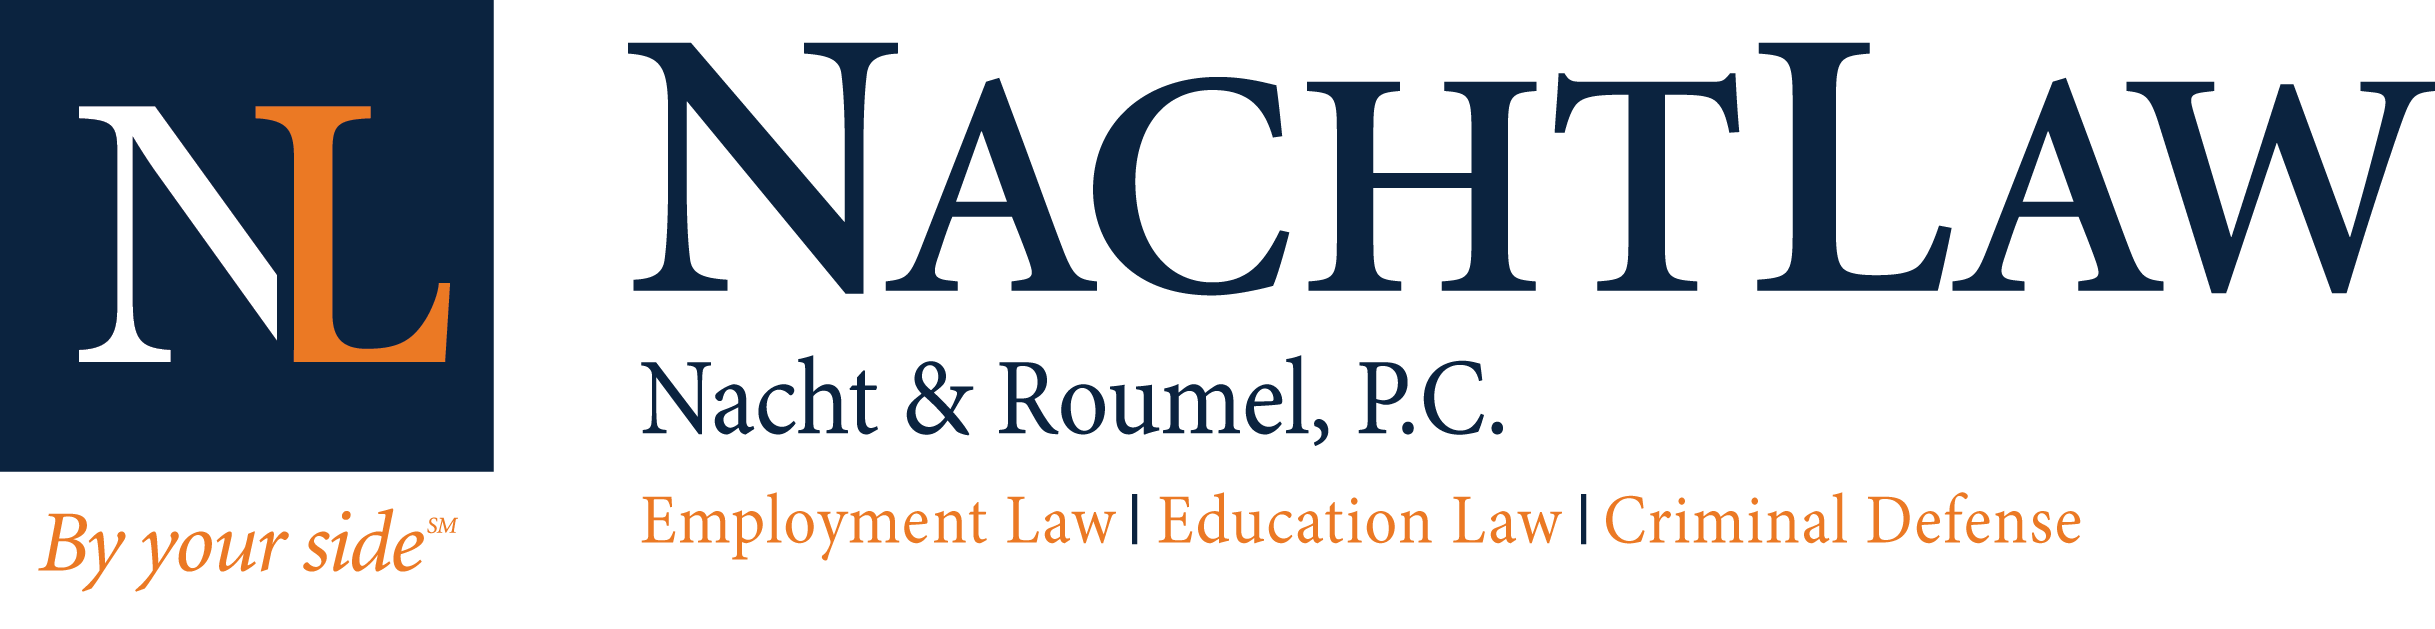 Nacht Law | Nacht & Roumel, P.C. | By your side | Employment Law | Educational Law | Criminal Defense